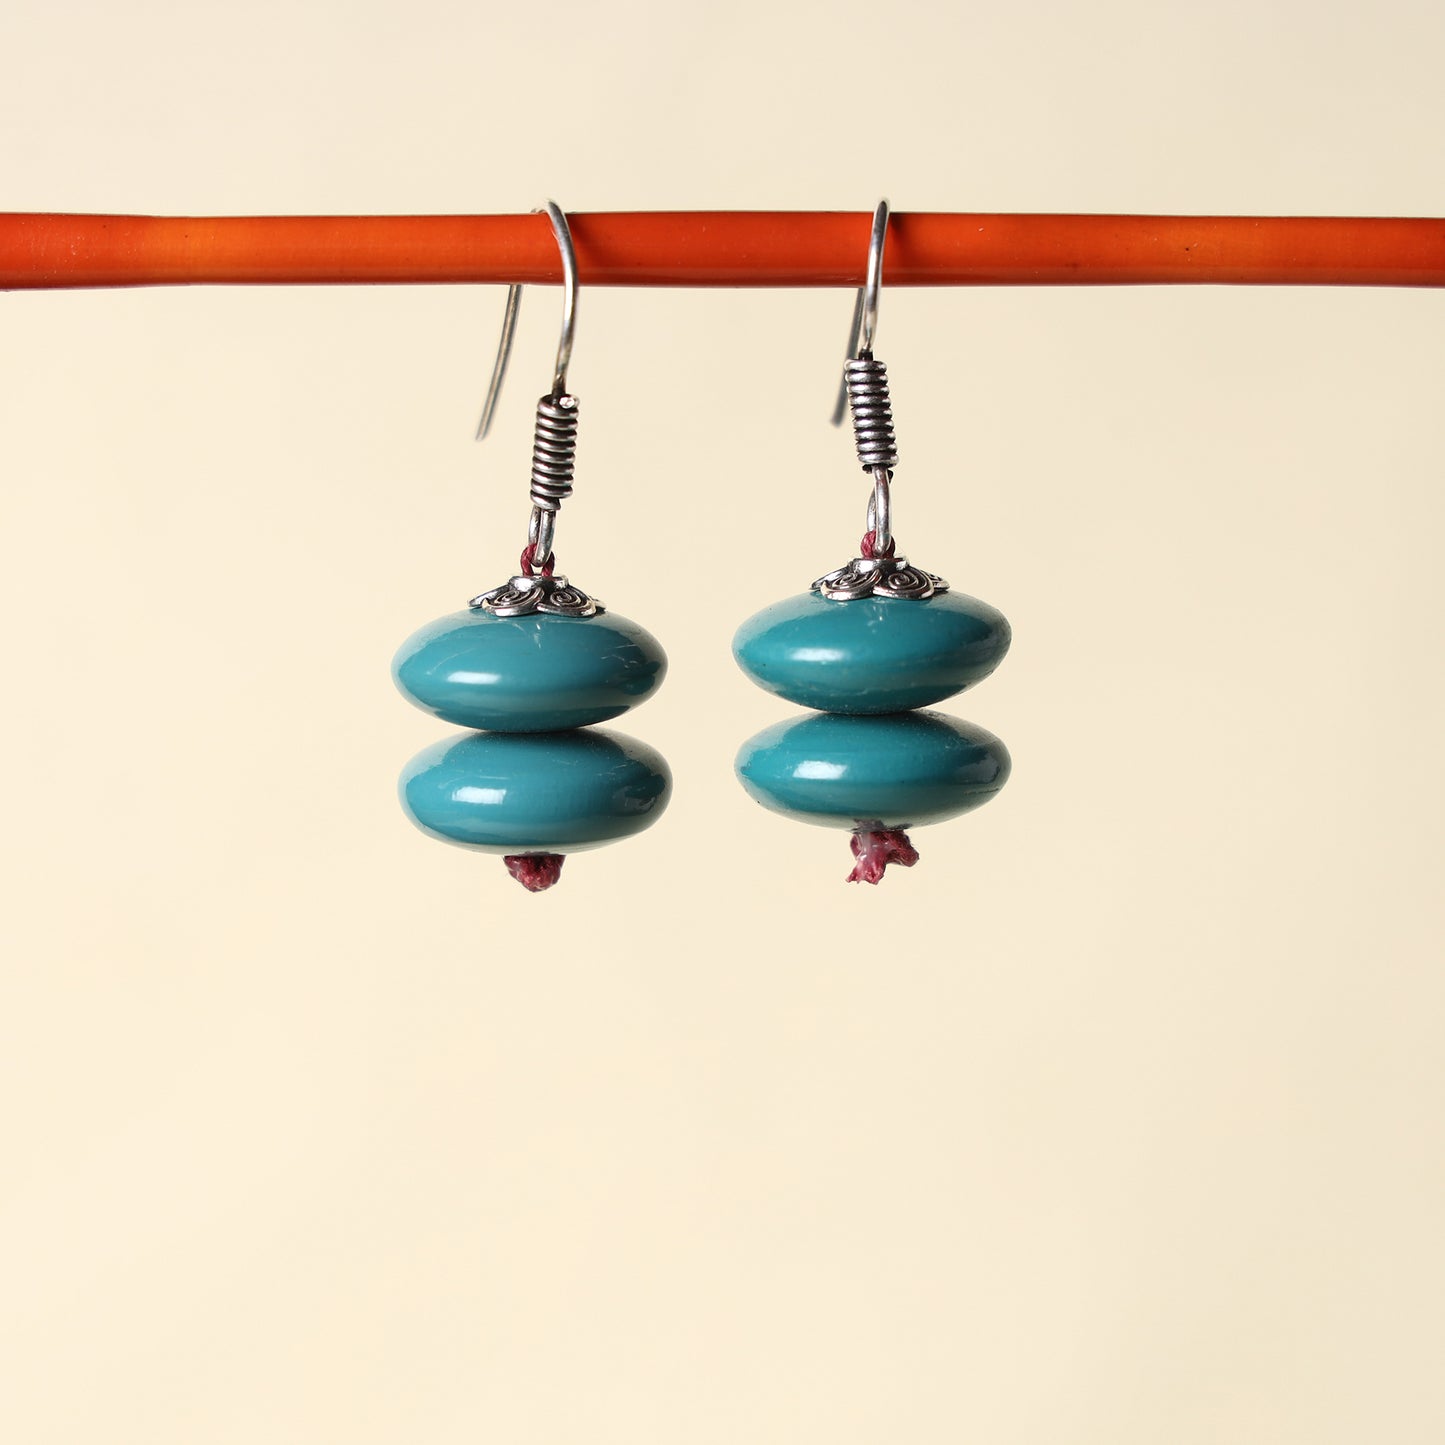 Channapatna Handcrafted Wooden Earrings 40